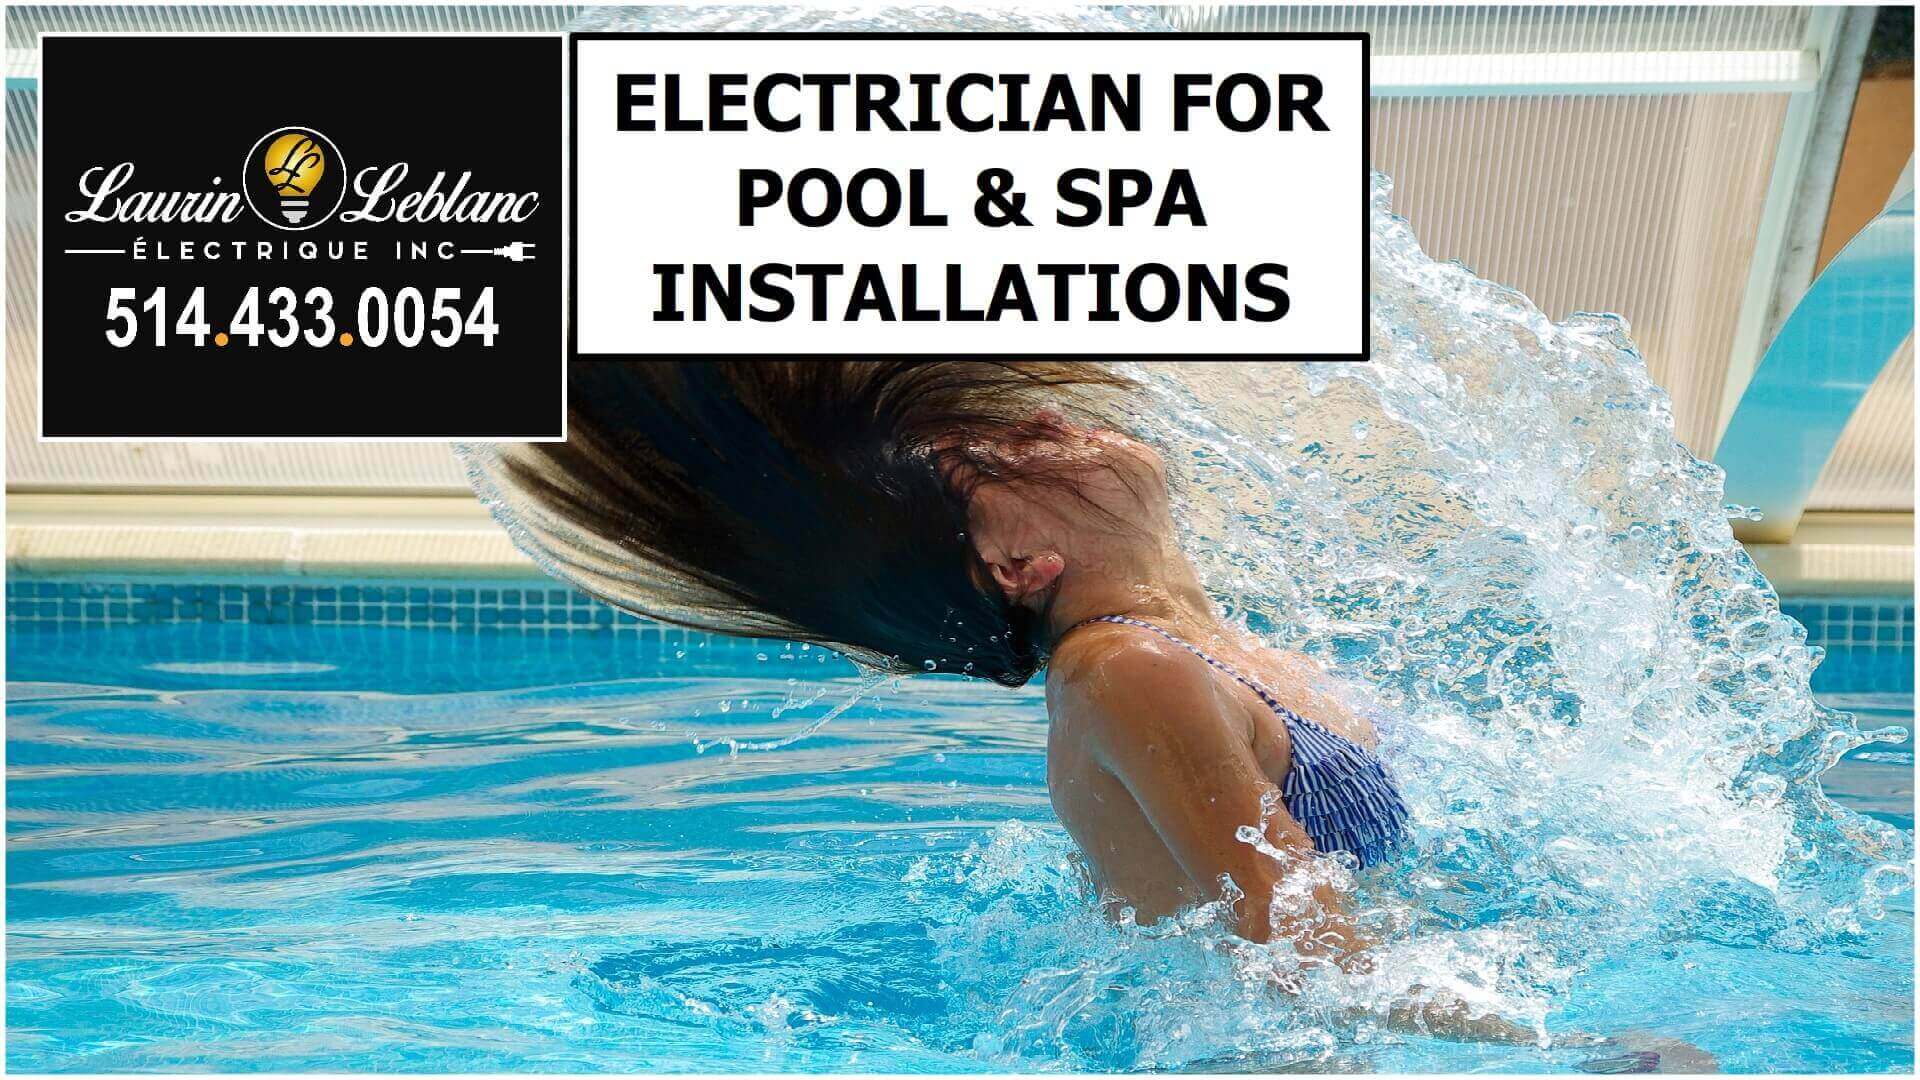 Pool Electrician in Vaudreuil